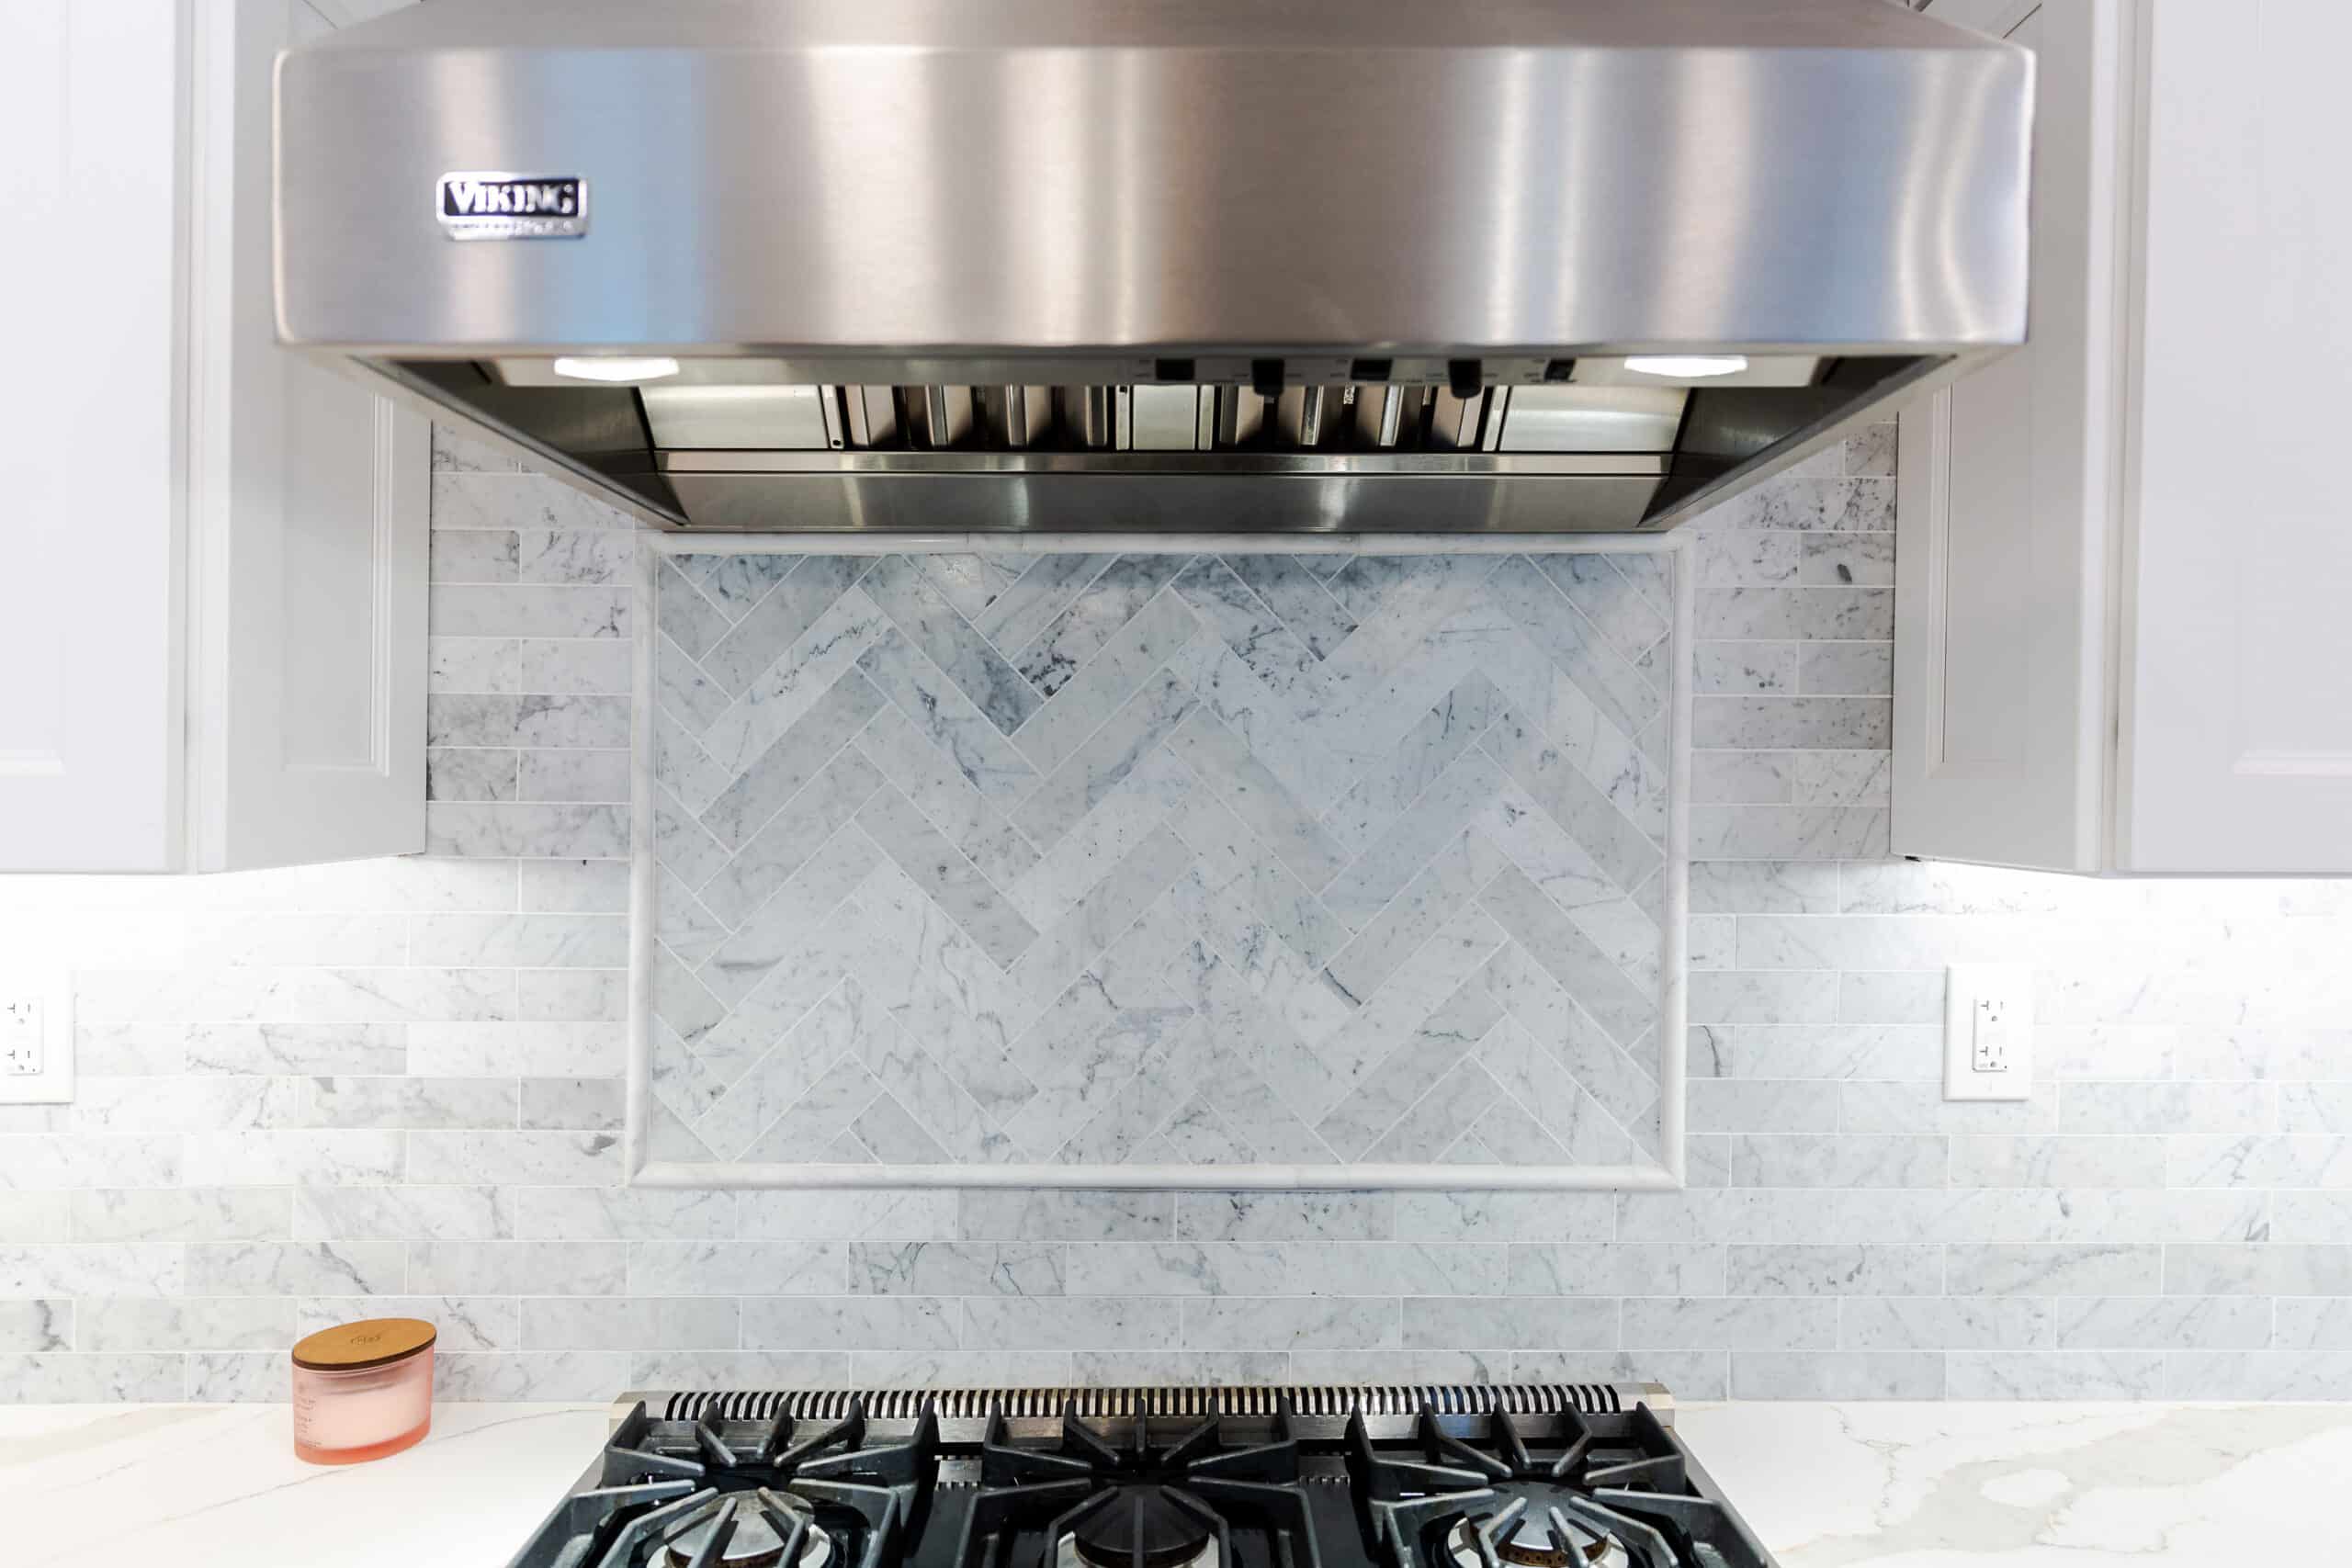 A kitchen with a sleek stainless steel hood and a luxurious marble backsplash